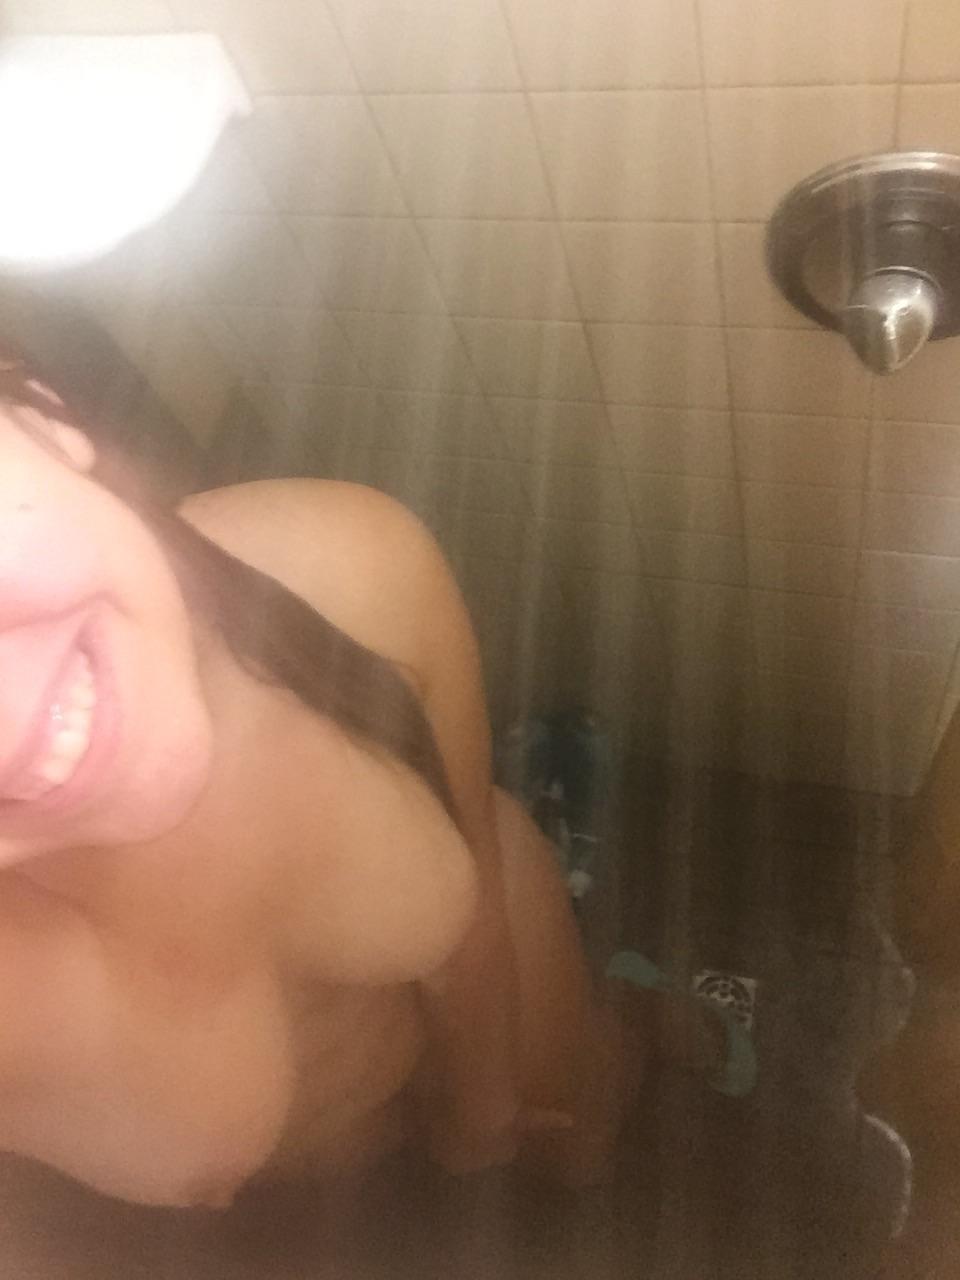 Texas girls naked in showers